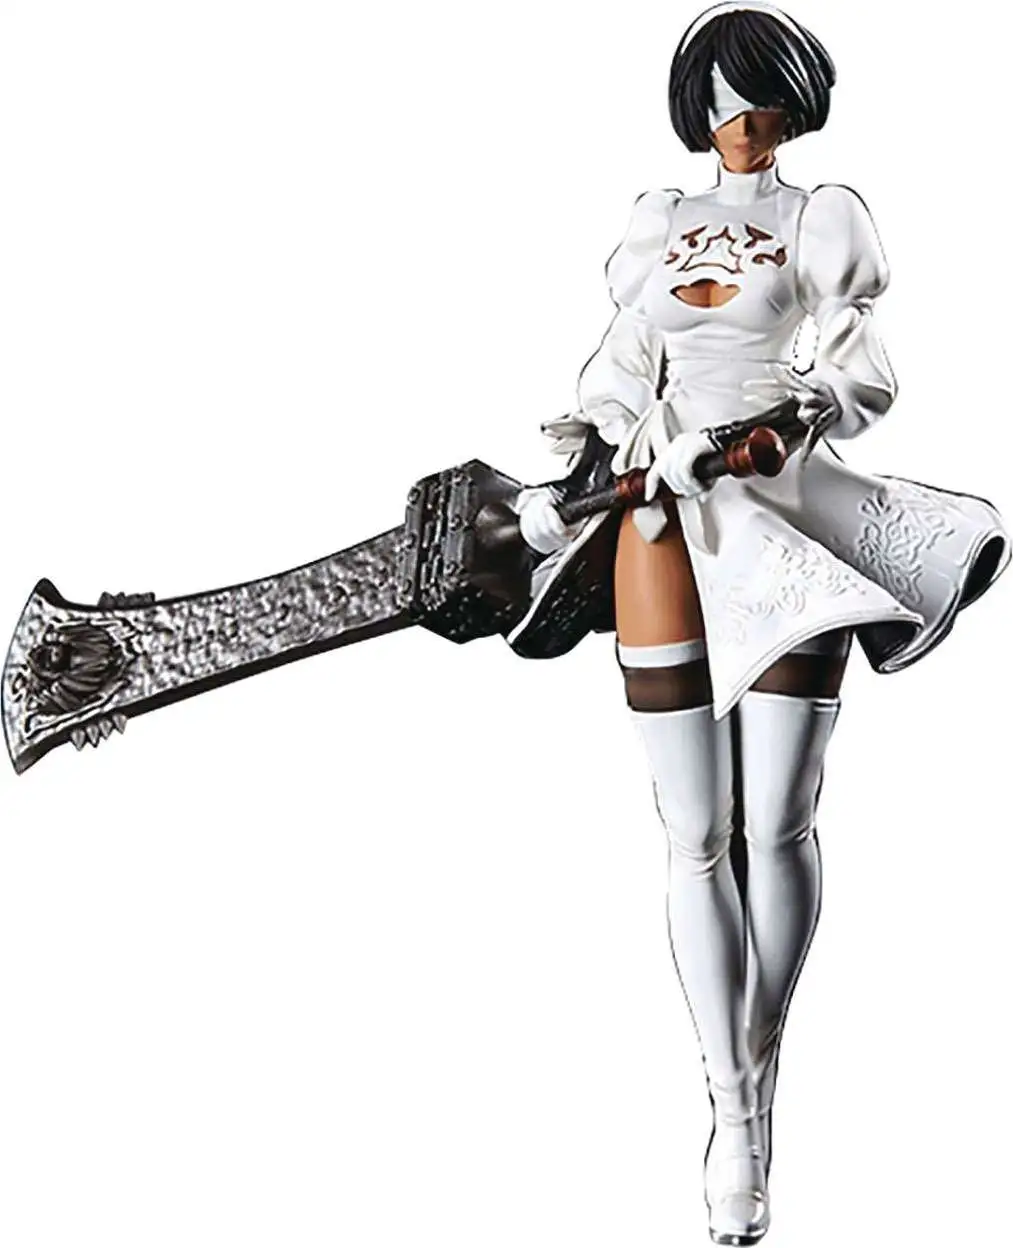 NieR Automata 2B 7 Statuette Beastlord Weapon, White Outfit Square Enix -  ToyWiz